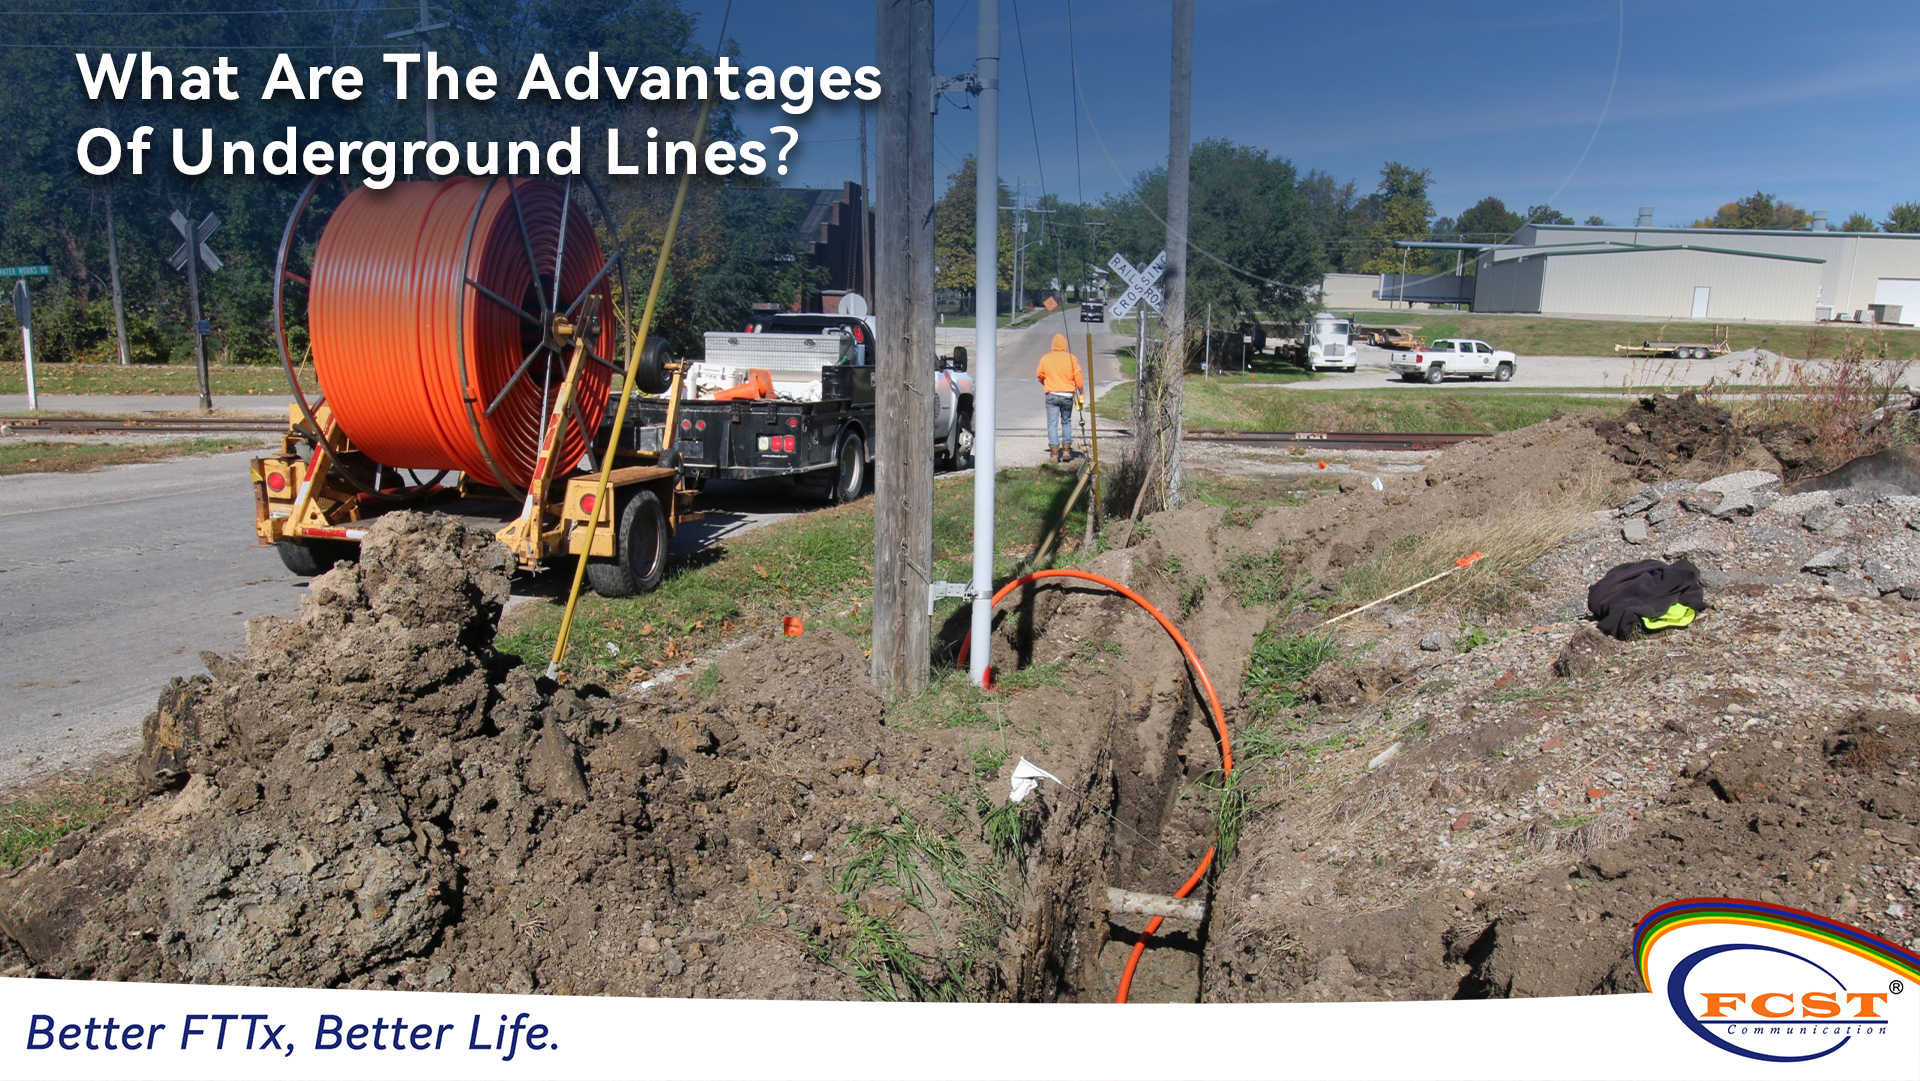 What Are The Advantages Of Underground Lines?